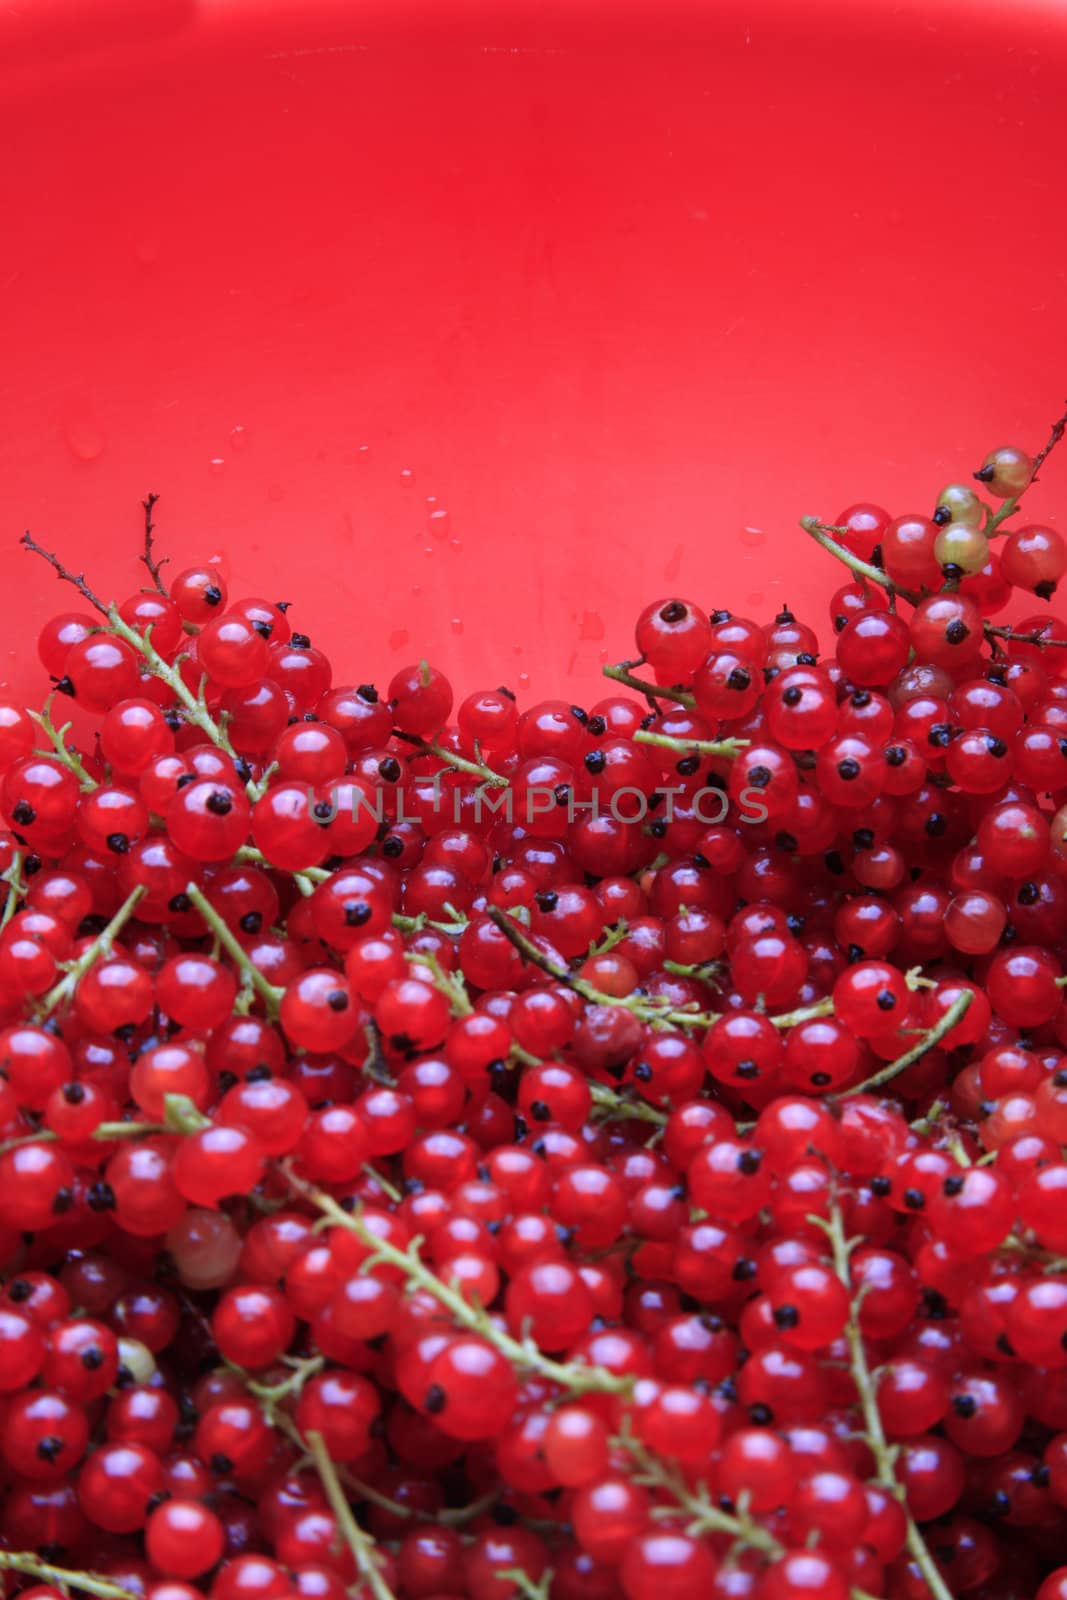 Red currant by adamr